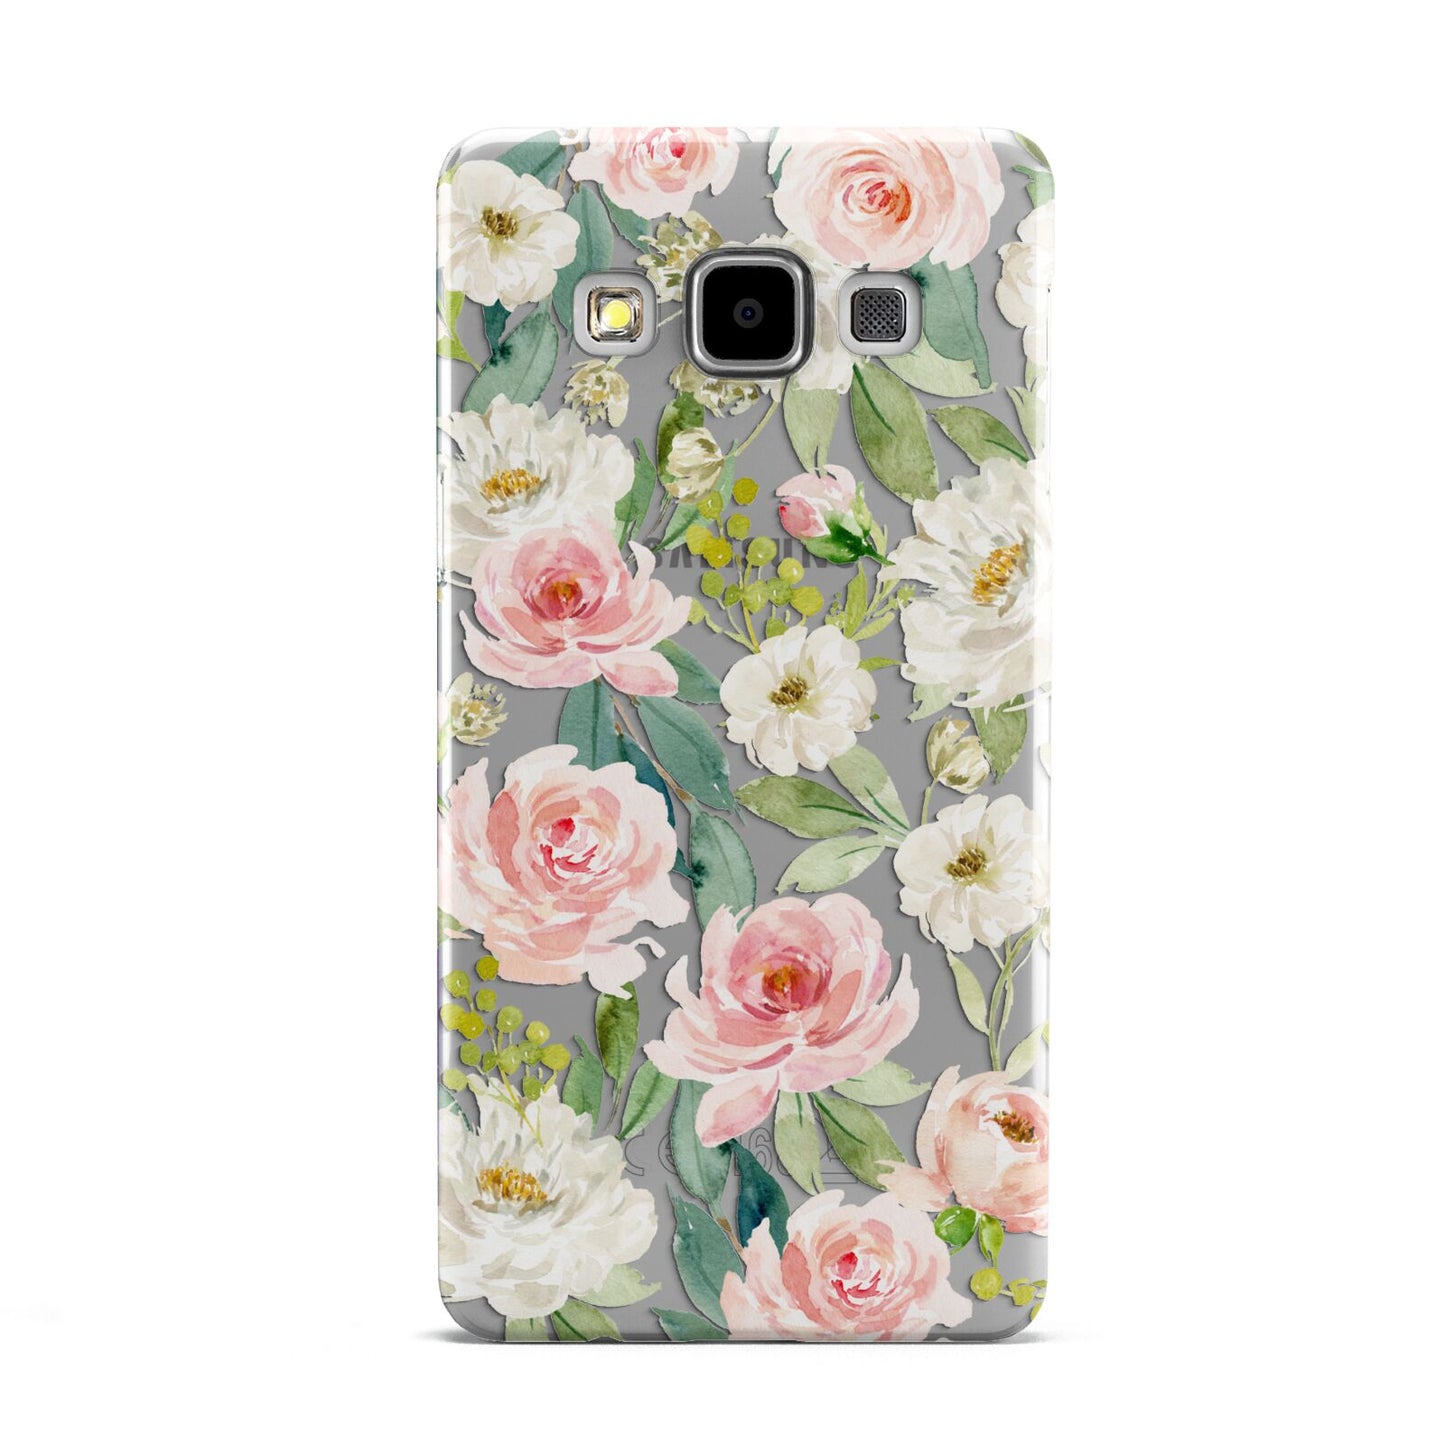 Watercolour Peonies Roses and Foliage Samsung Galaxy A5 Case